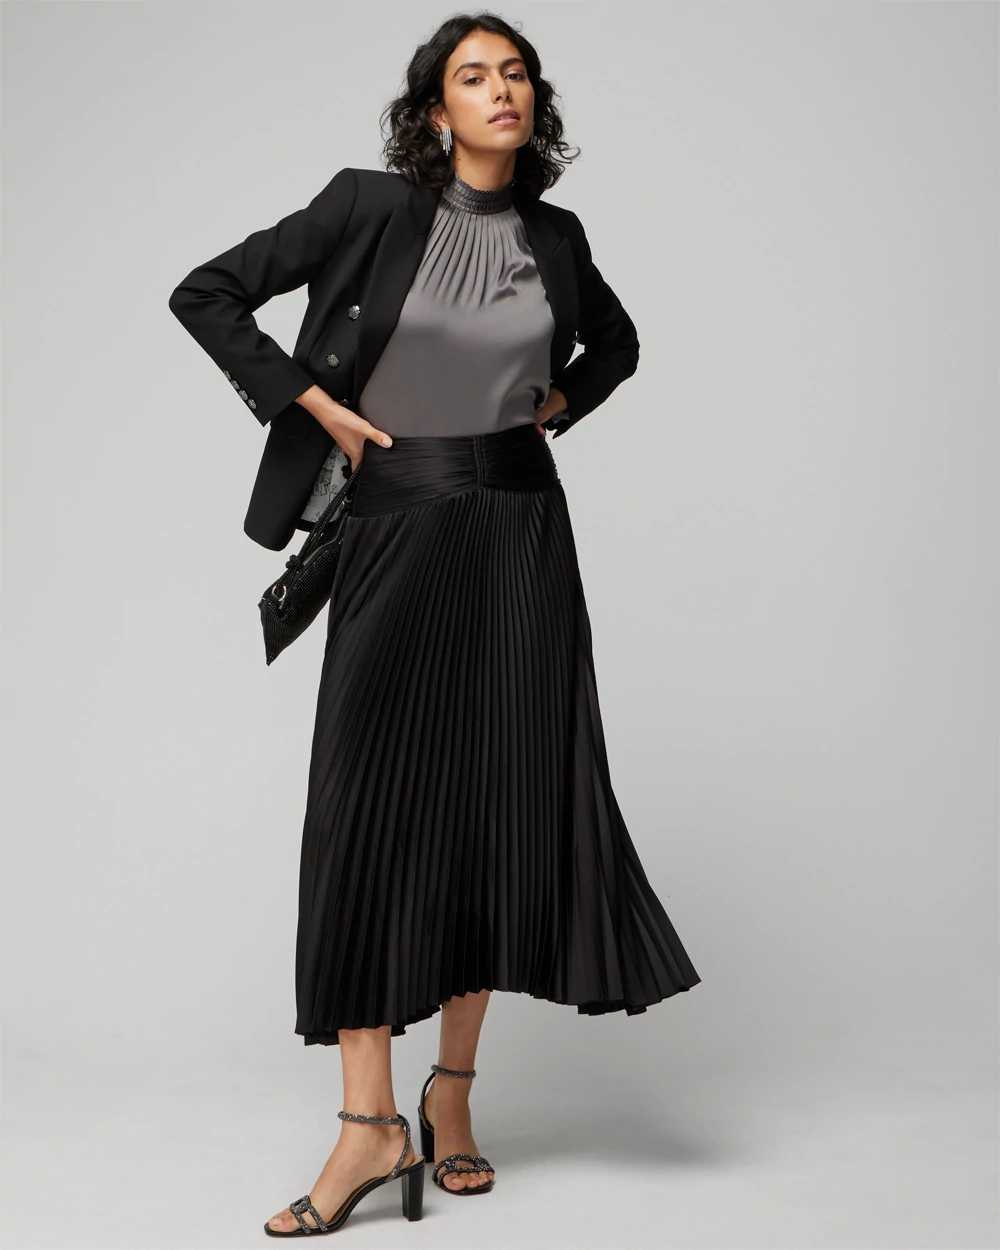 Satin Pleated Midi Skirt click to view larger image.